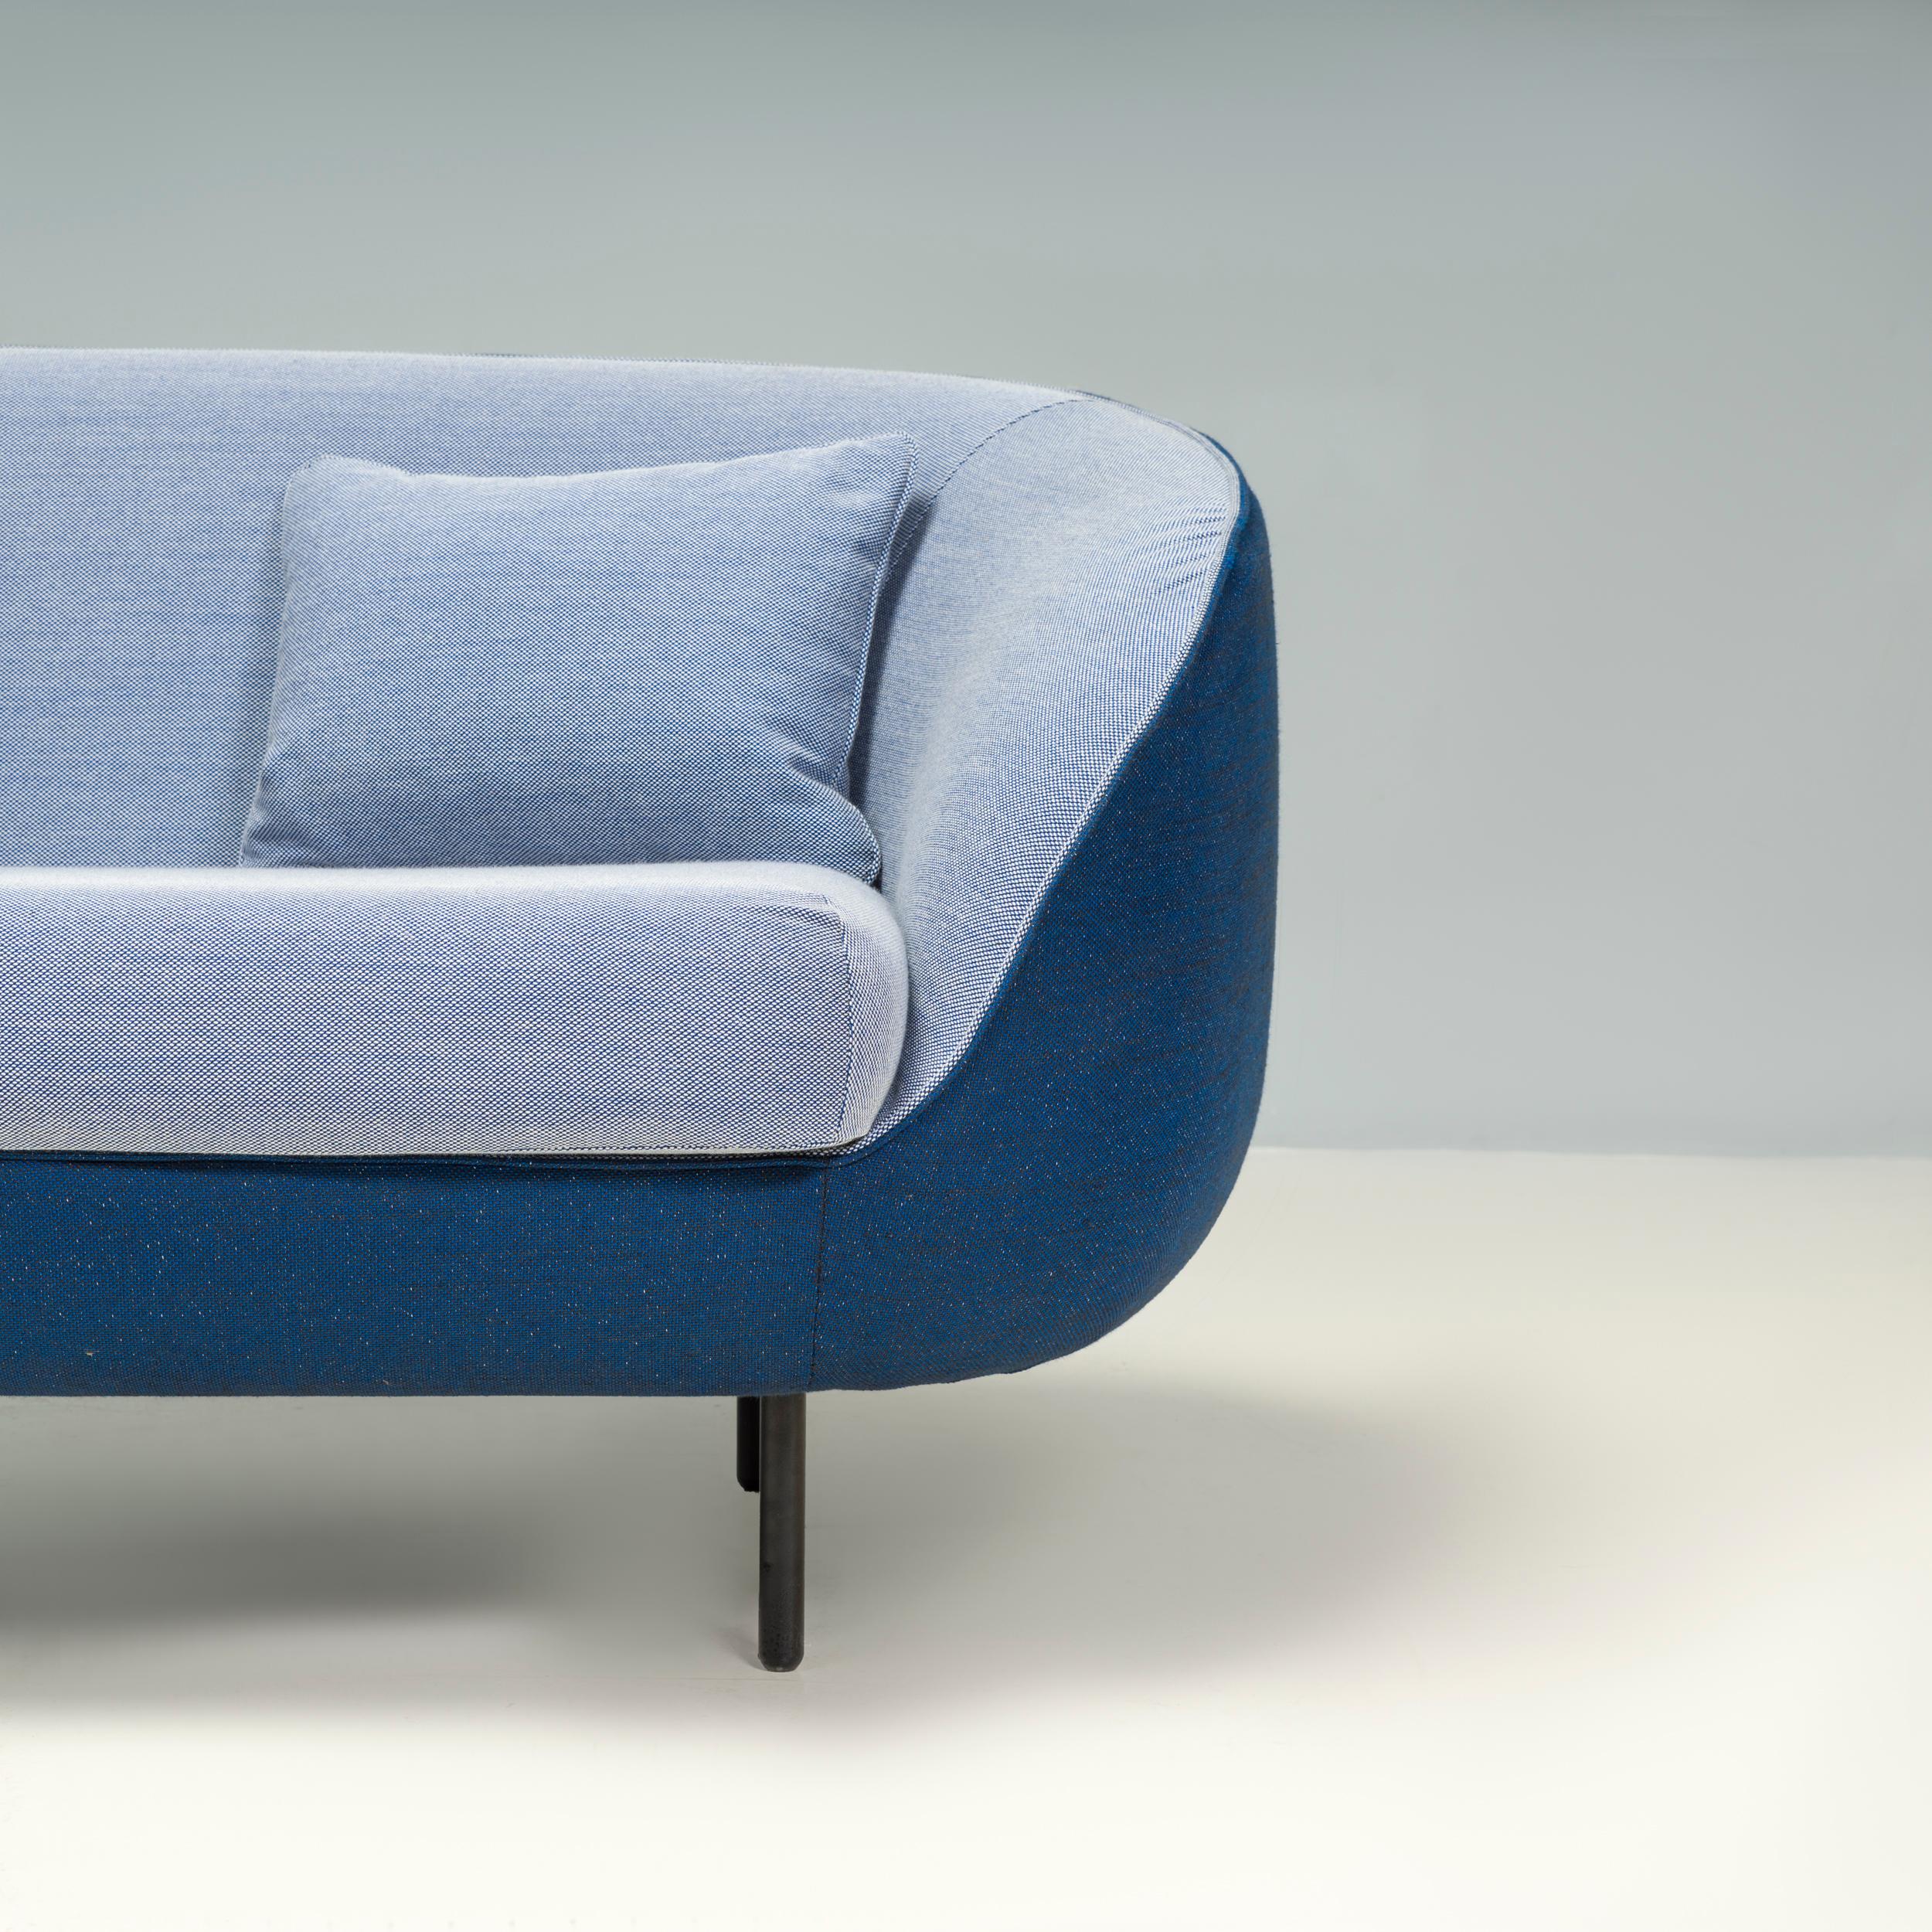 Fredericia by GamFratesi Two Tone Blue Fabric Haiku 2 Seater Sofa, 2018 In Good Condition For Sale In London, GB